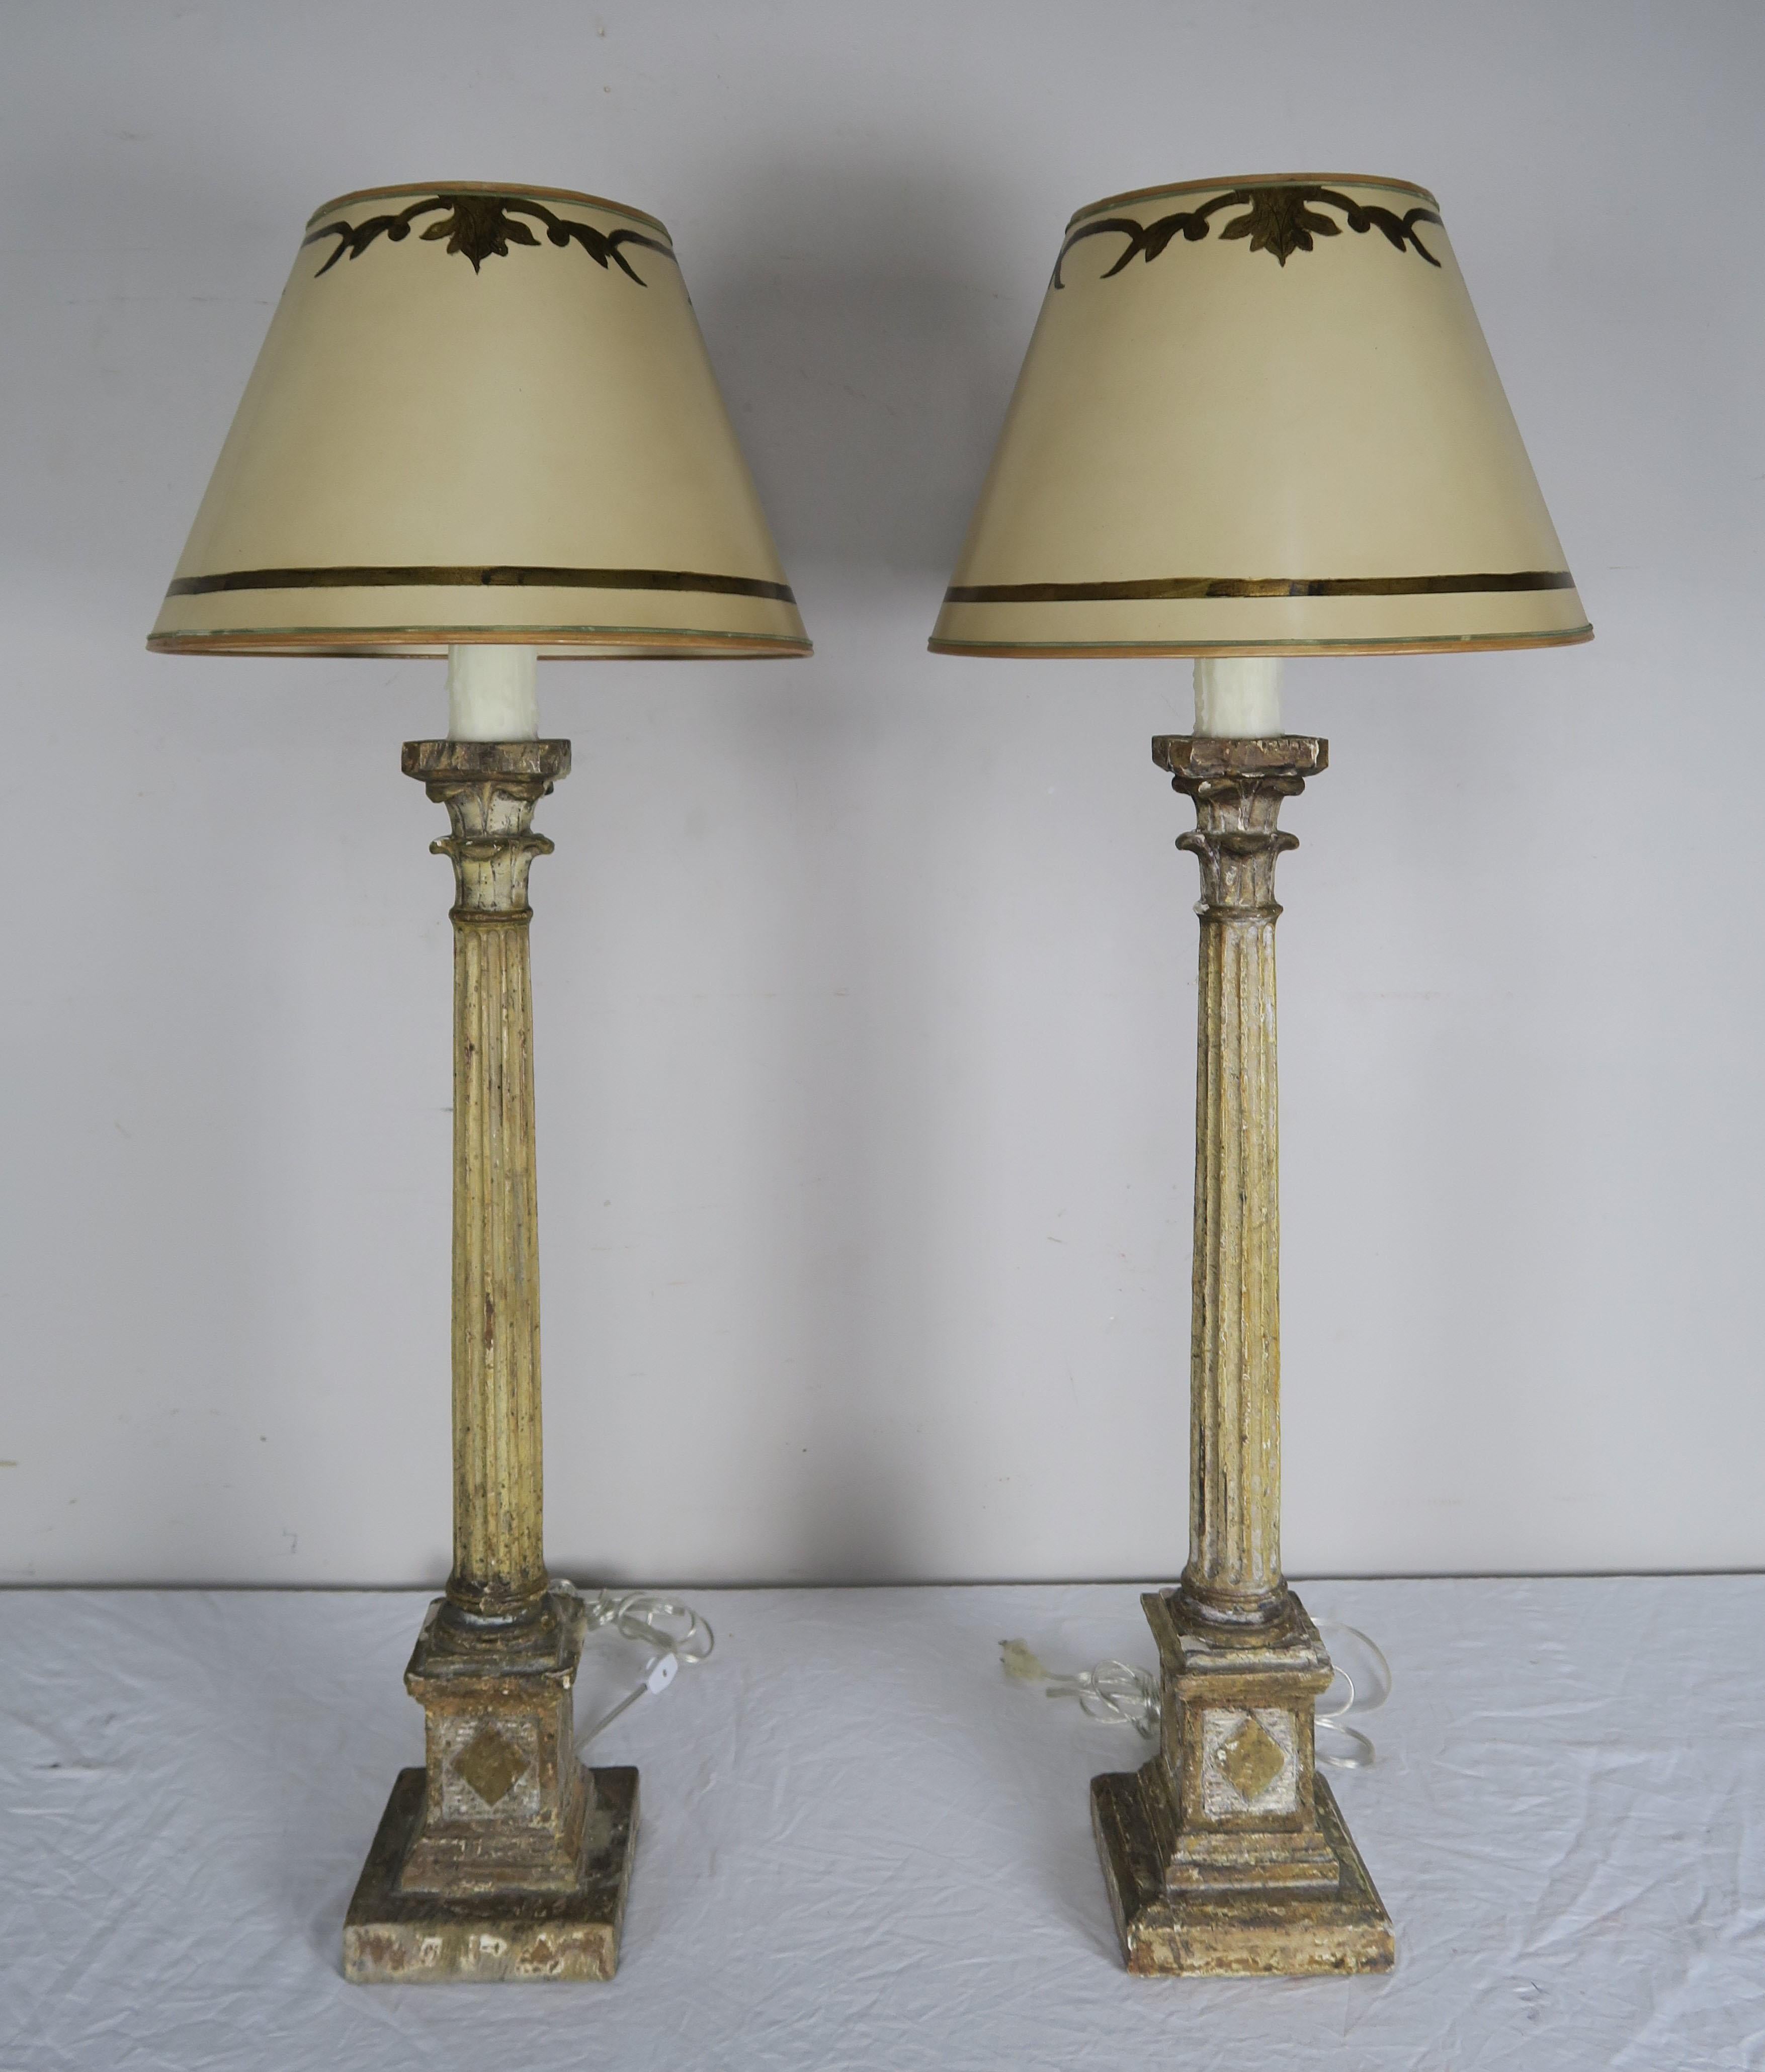 Pair of Italian Carved Neoclassical Style Lamps with Parchment Shades en vente 3